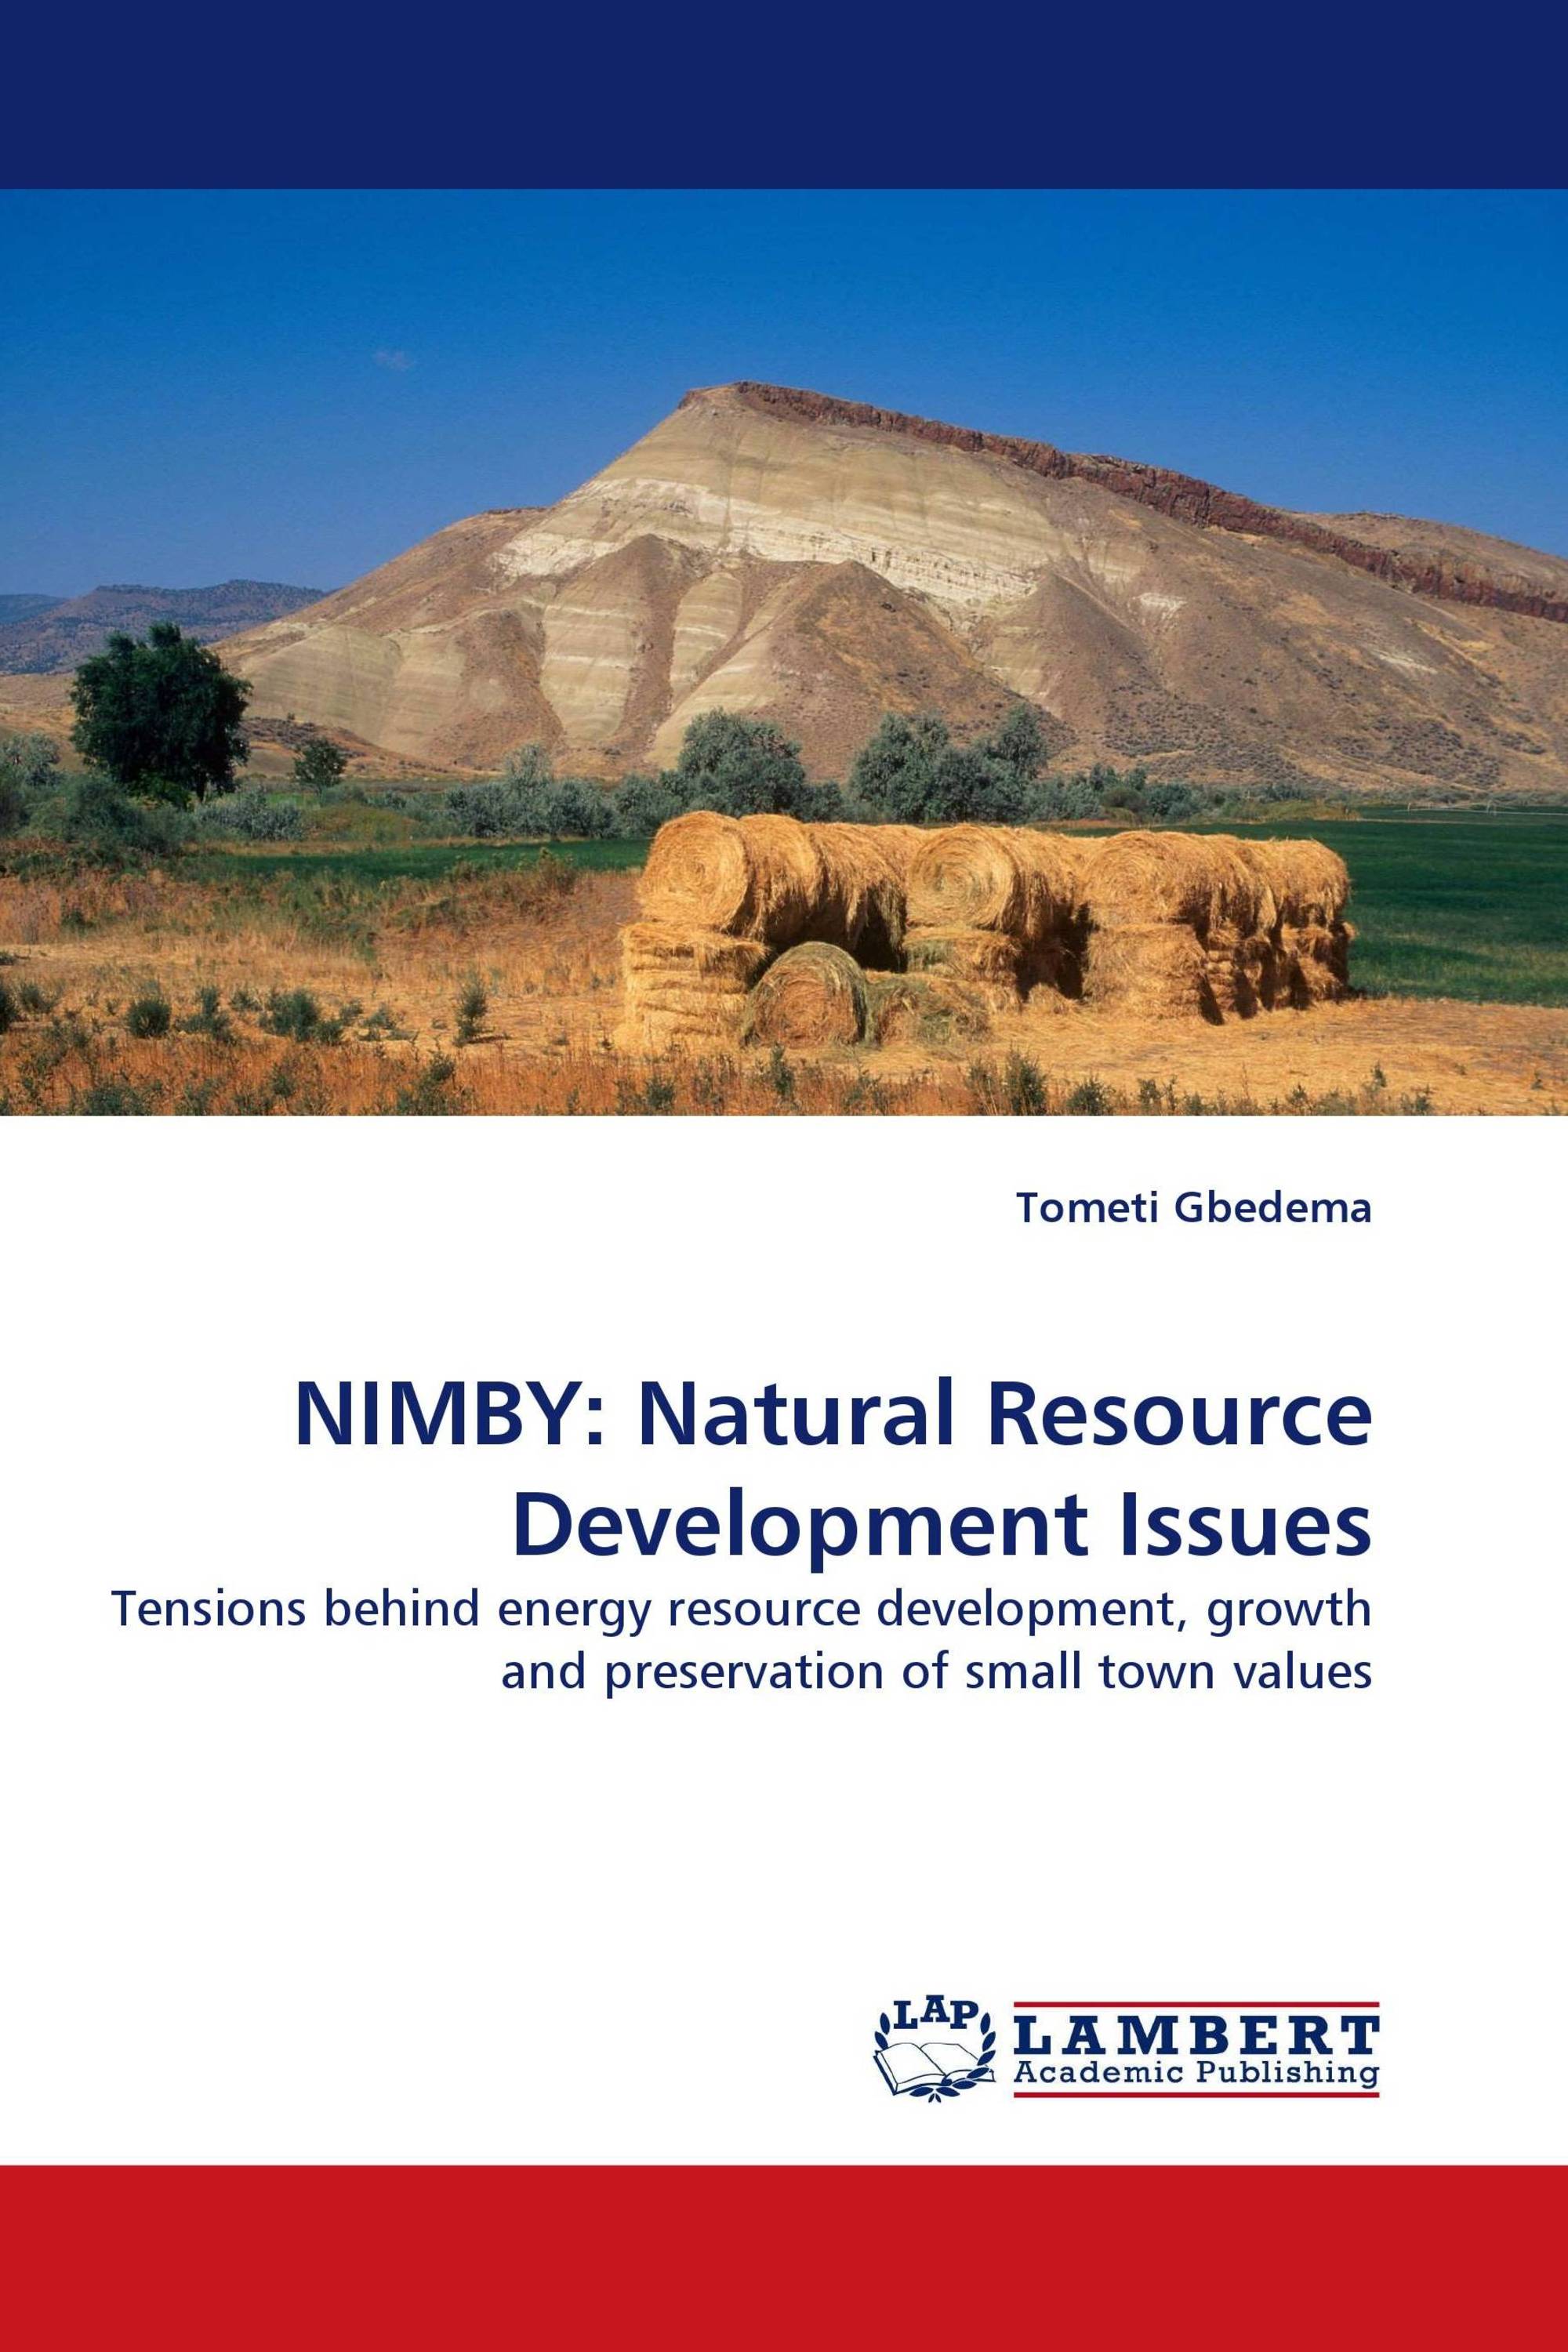 NIMBY: Natural Resource Development Issues